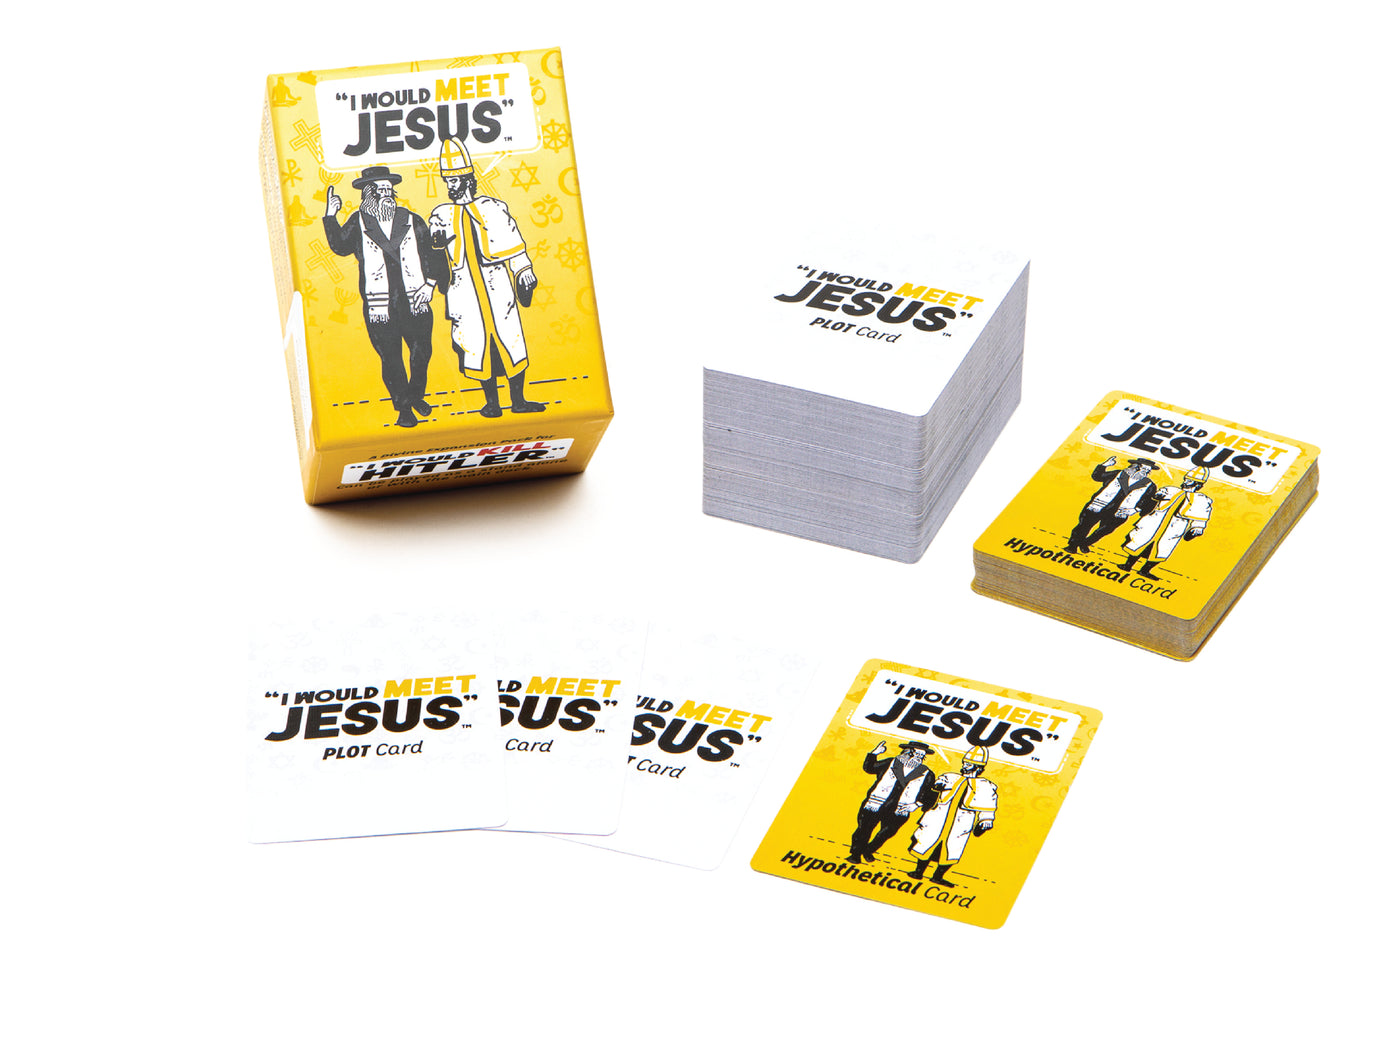 "I Would Meet Jesus" - A Party Game of Hilarious Hypotheticals